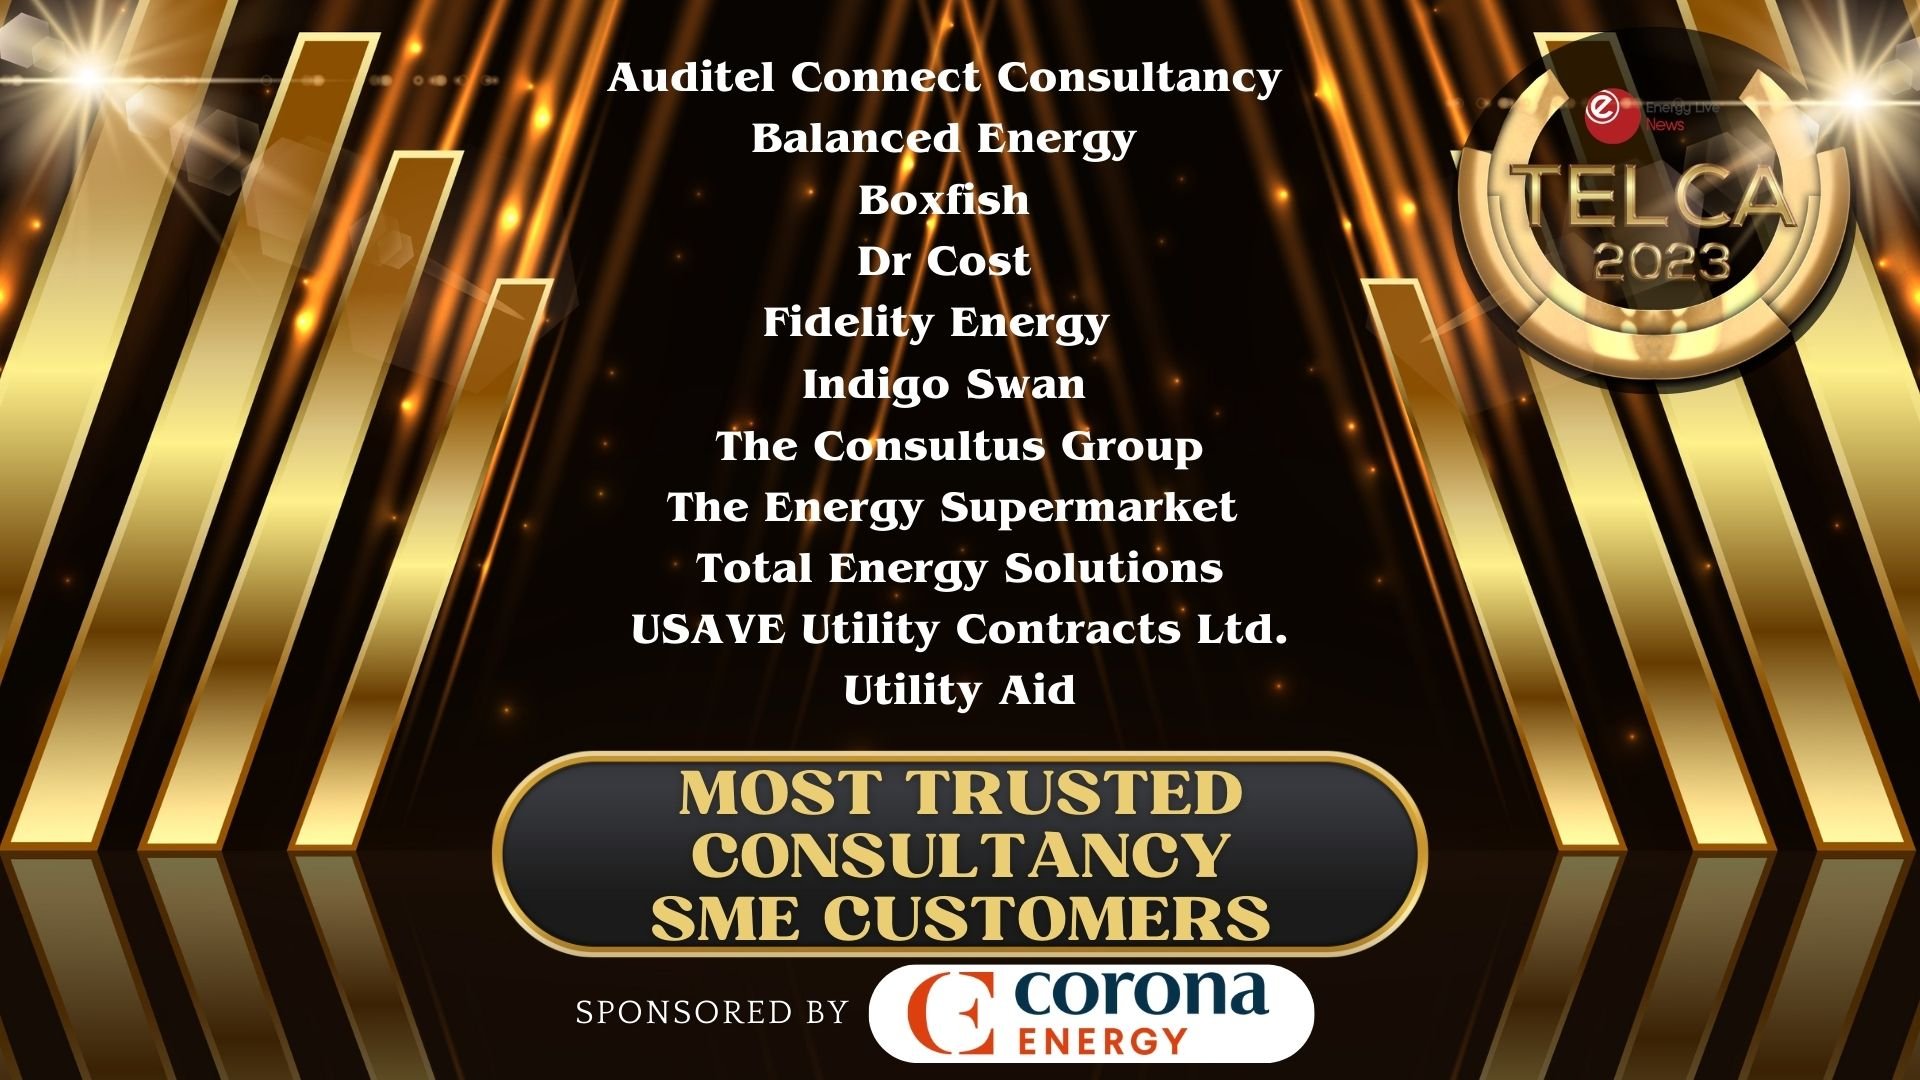 Most Trusted Consultancy SME